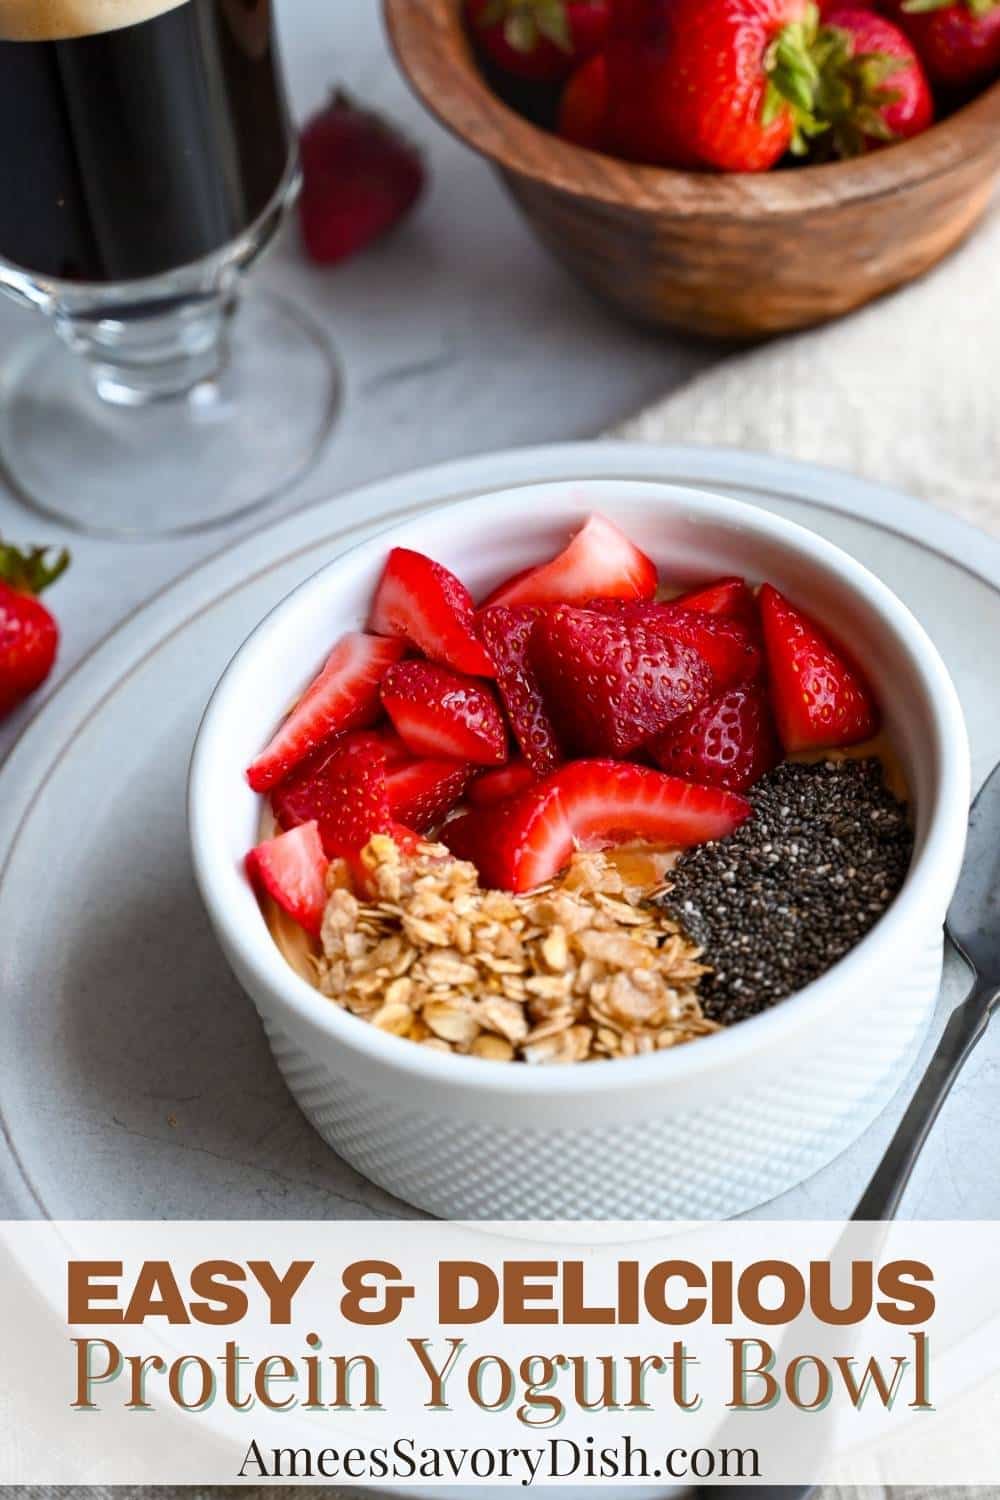 This Protein Yogurt Bowl recipe upgrades protein-packed Greek yogurt with well – more protein! Quick, easy, and delicious! via @Ameessavorydish